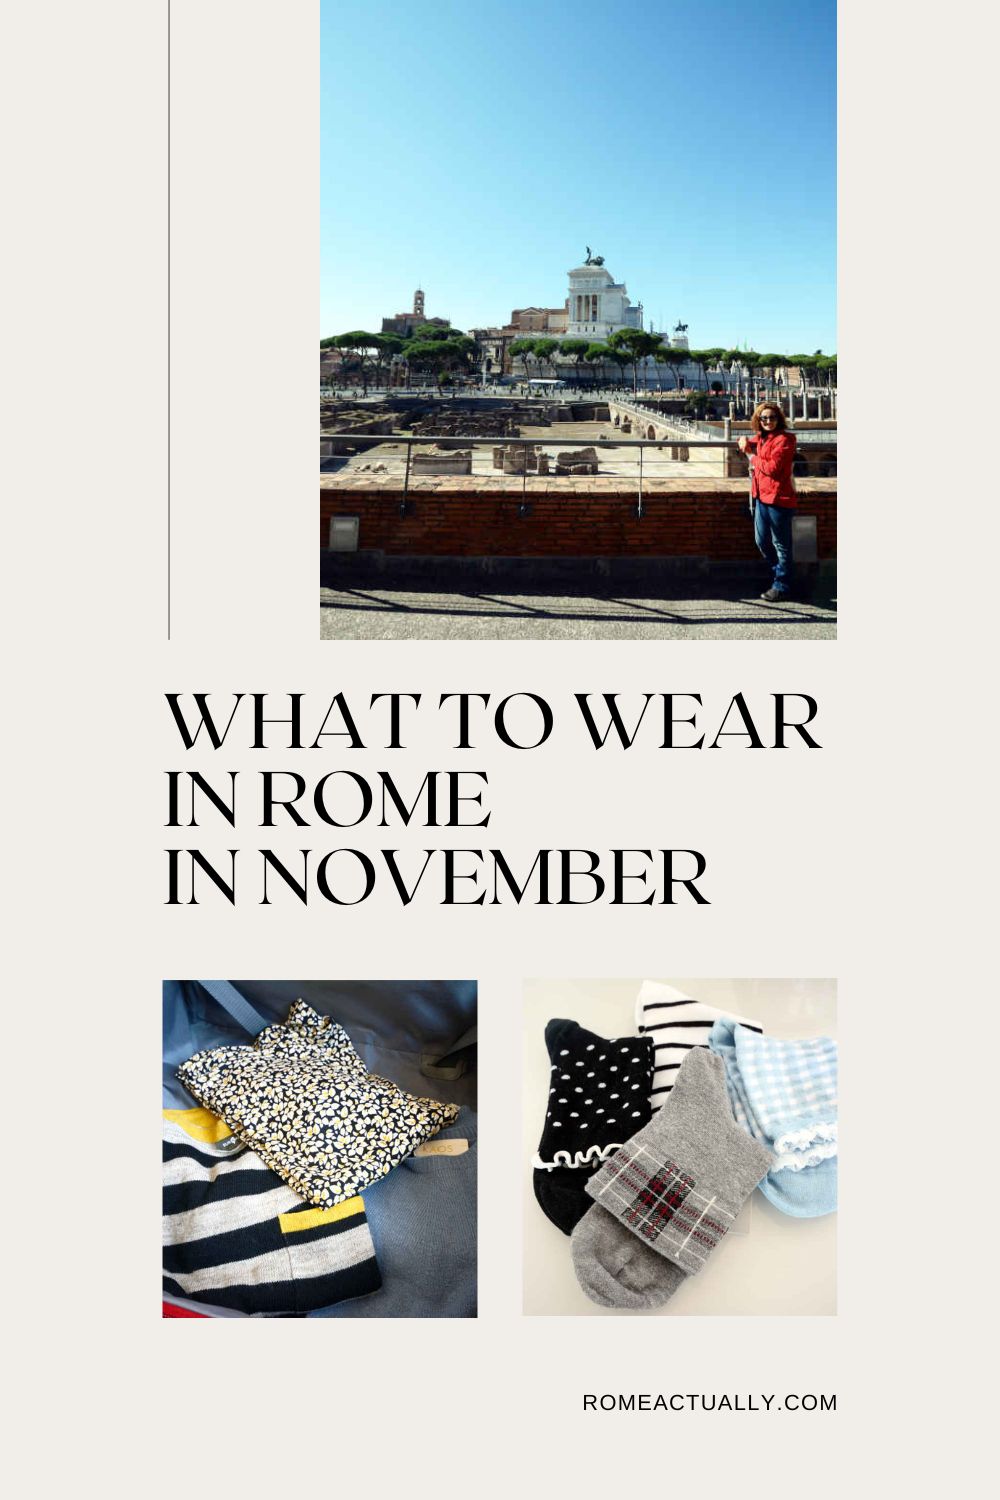 Pinterest image with three photos of Rome and clothes and a caption reading "What to wear in Rome in November".